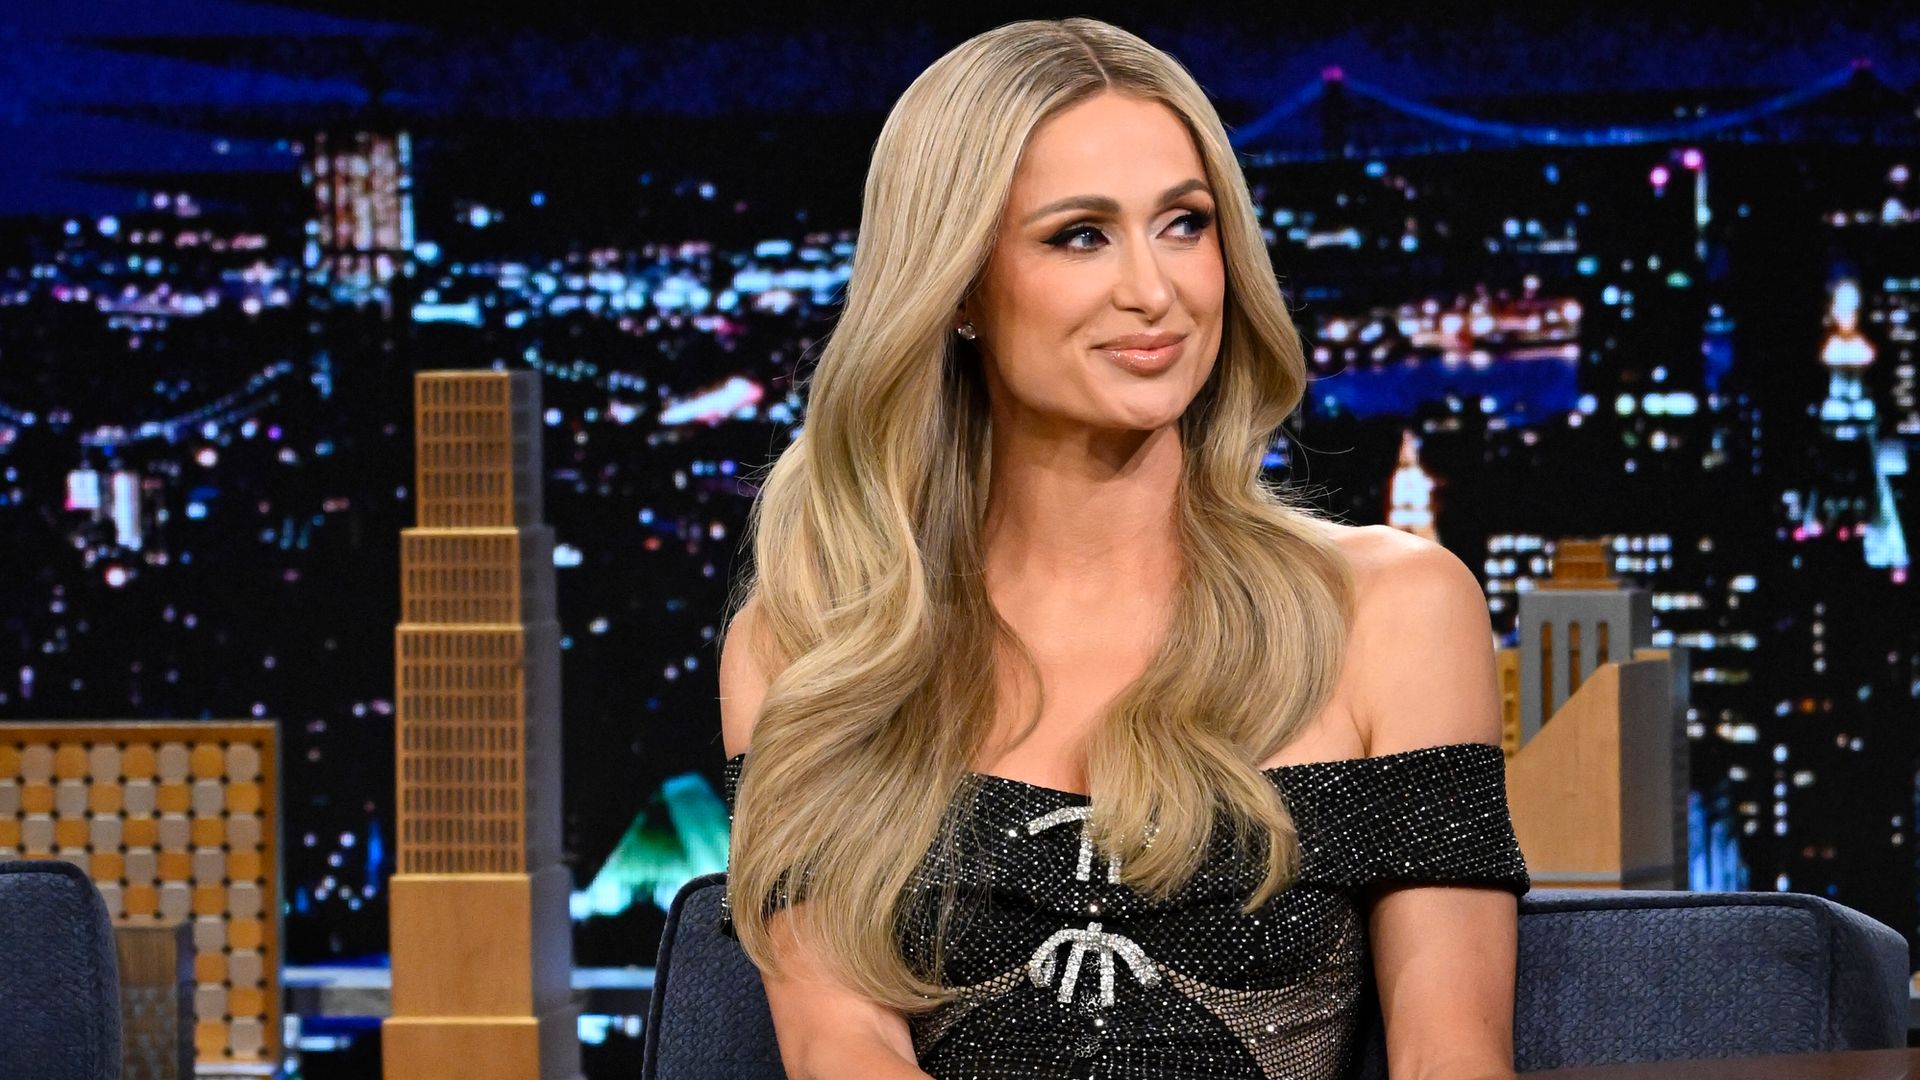 THE TONIGHT SHOW STARRING JIMMY FALLON -- Episode 1855 -- Pictured: Media Personality Paris Hilton during an interview on Tuesday, October 17, 2023 -- (Photo by: Todd Owyoung/NBC via Getty Images)